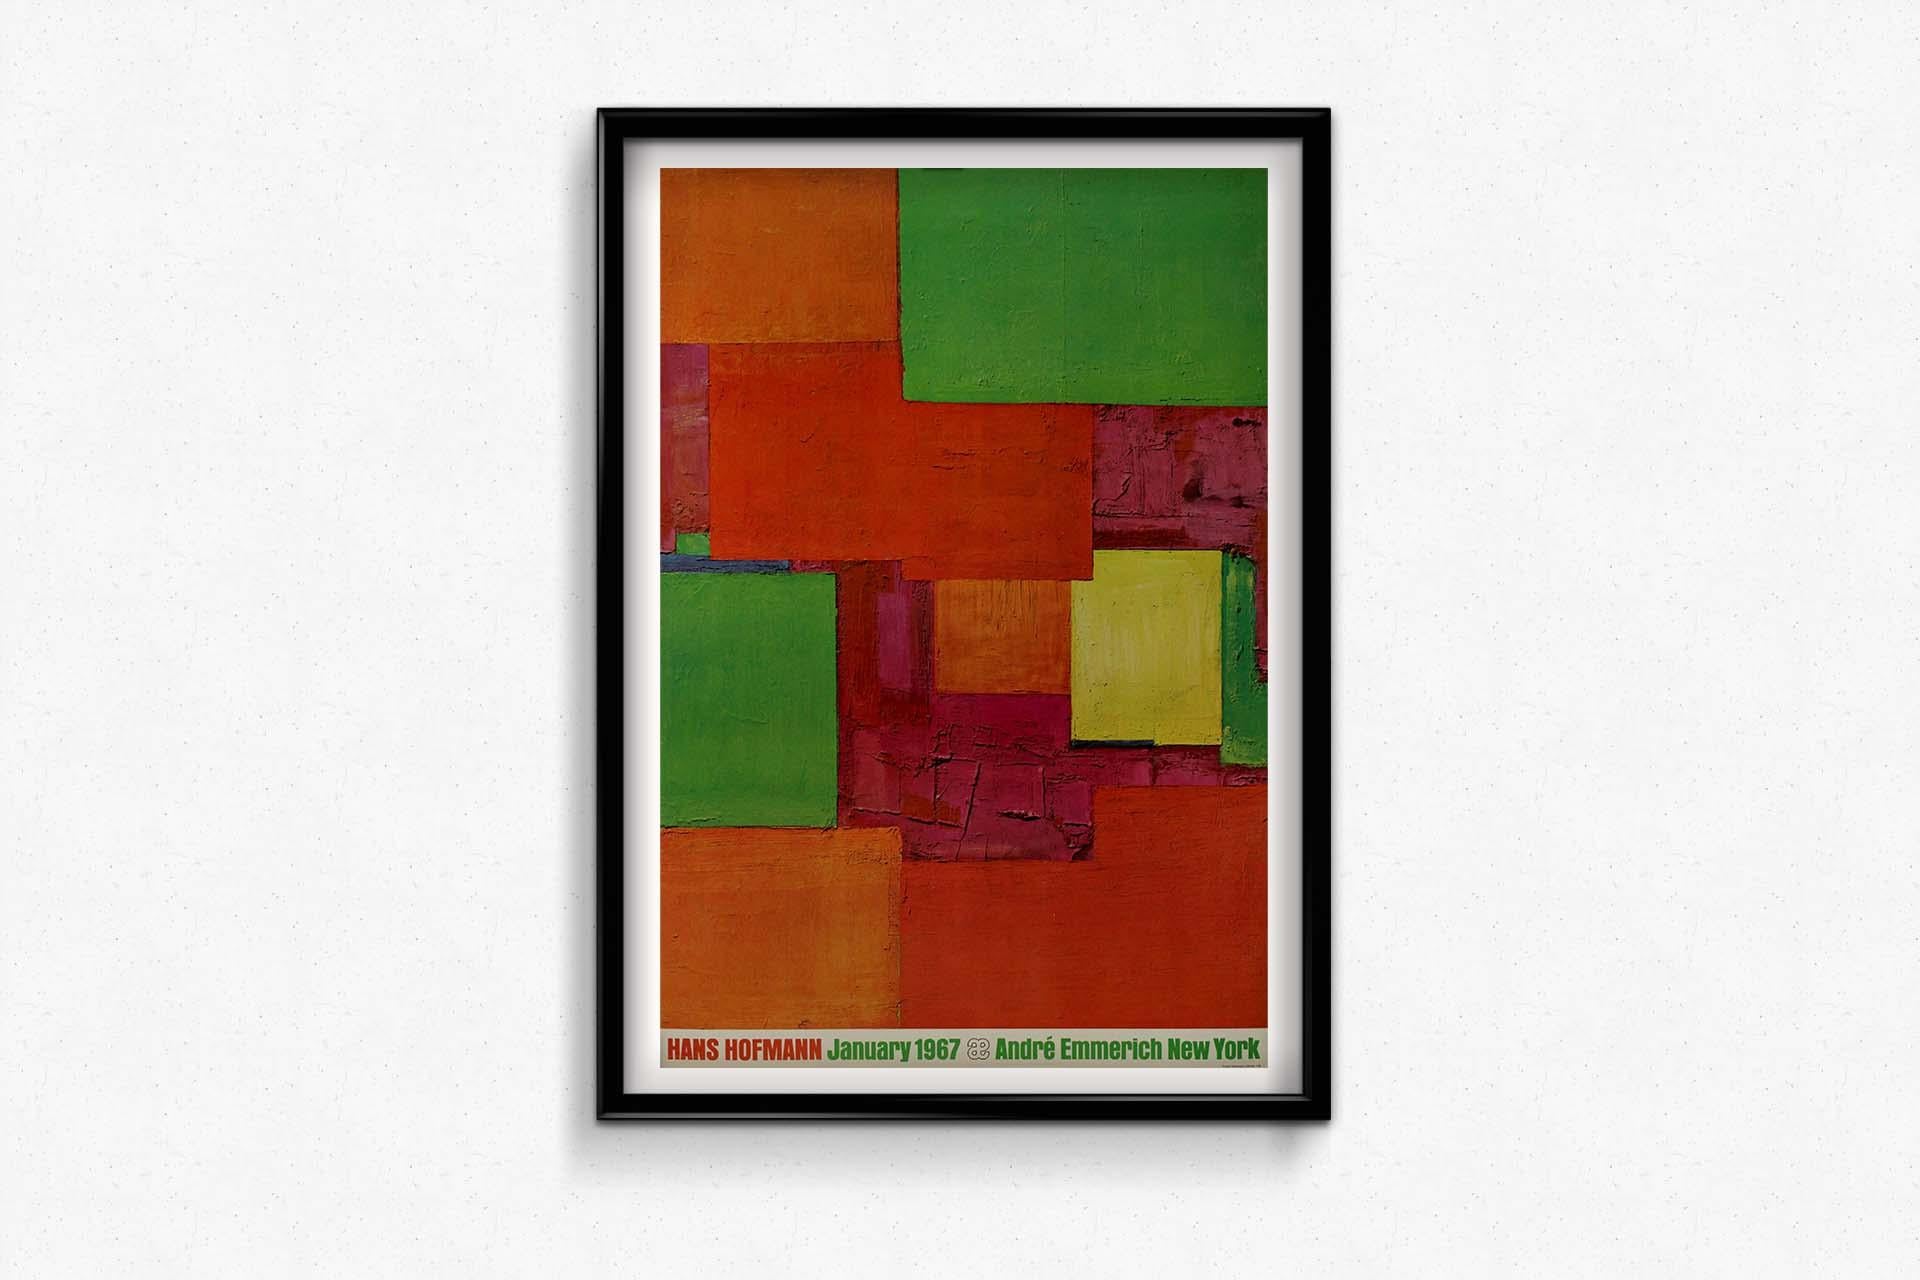 1967 original exhibition poster for Hans Hofmann's at the André Emmerich Gallery For Sale 3